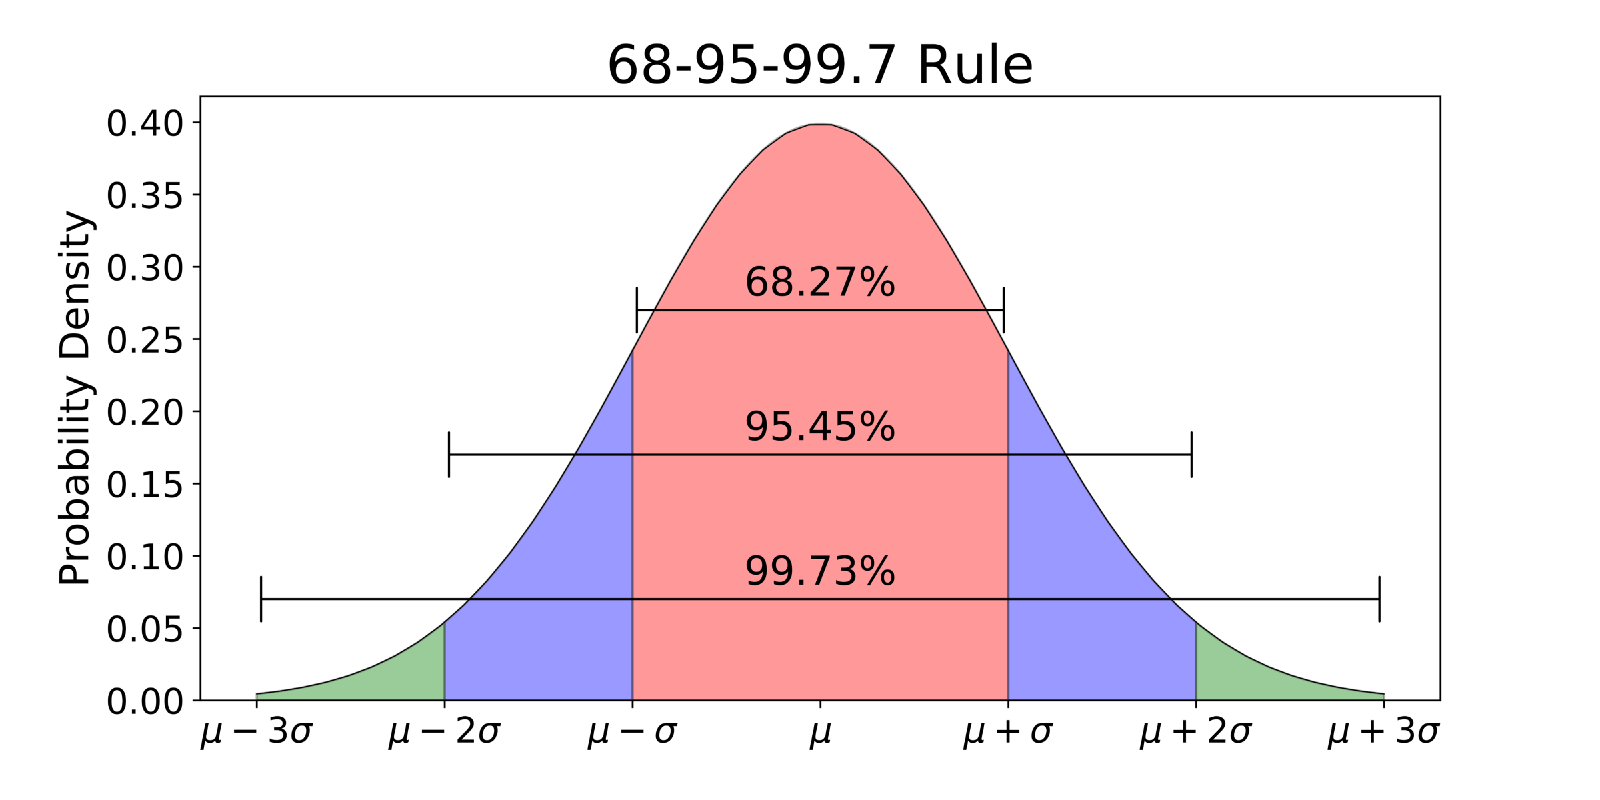 The "normal distribution" of data is important, which in simple words mean the bell curve of data spread. Half on one side of mean and half on other side...